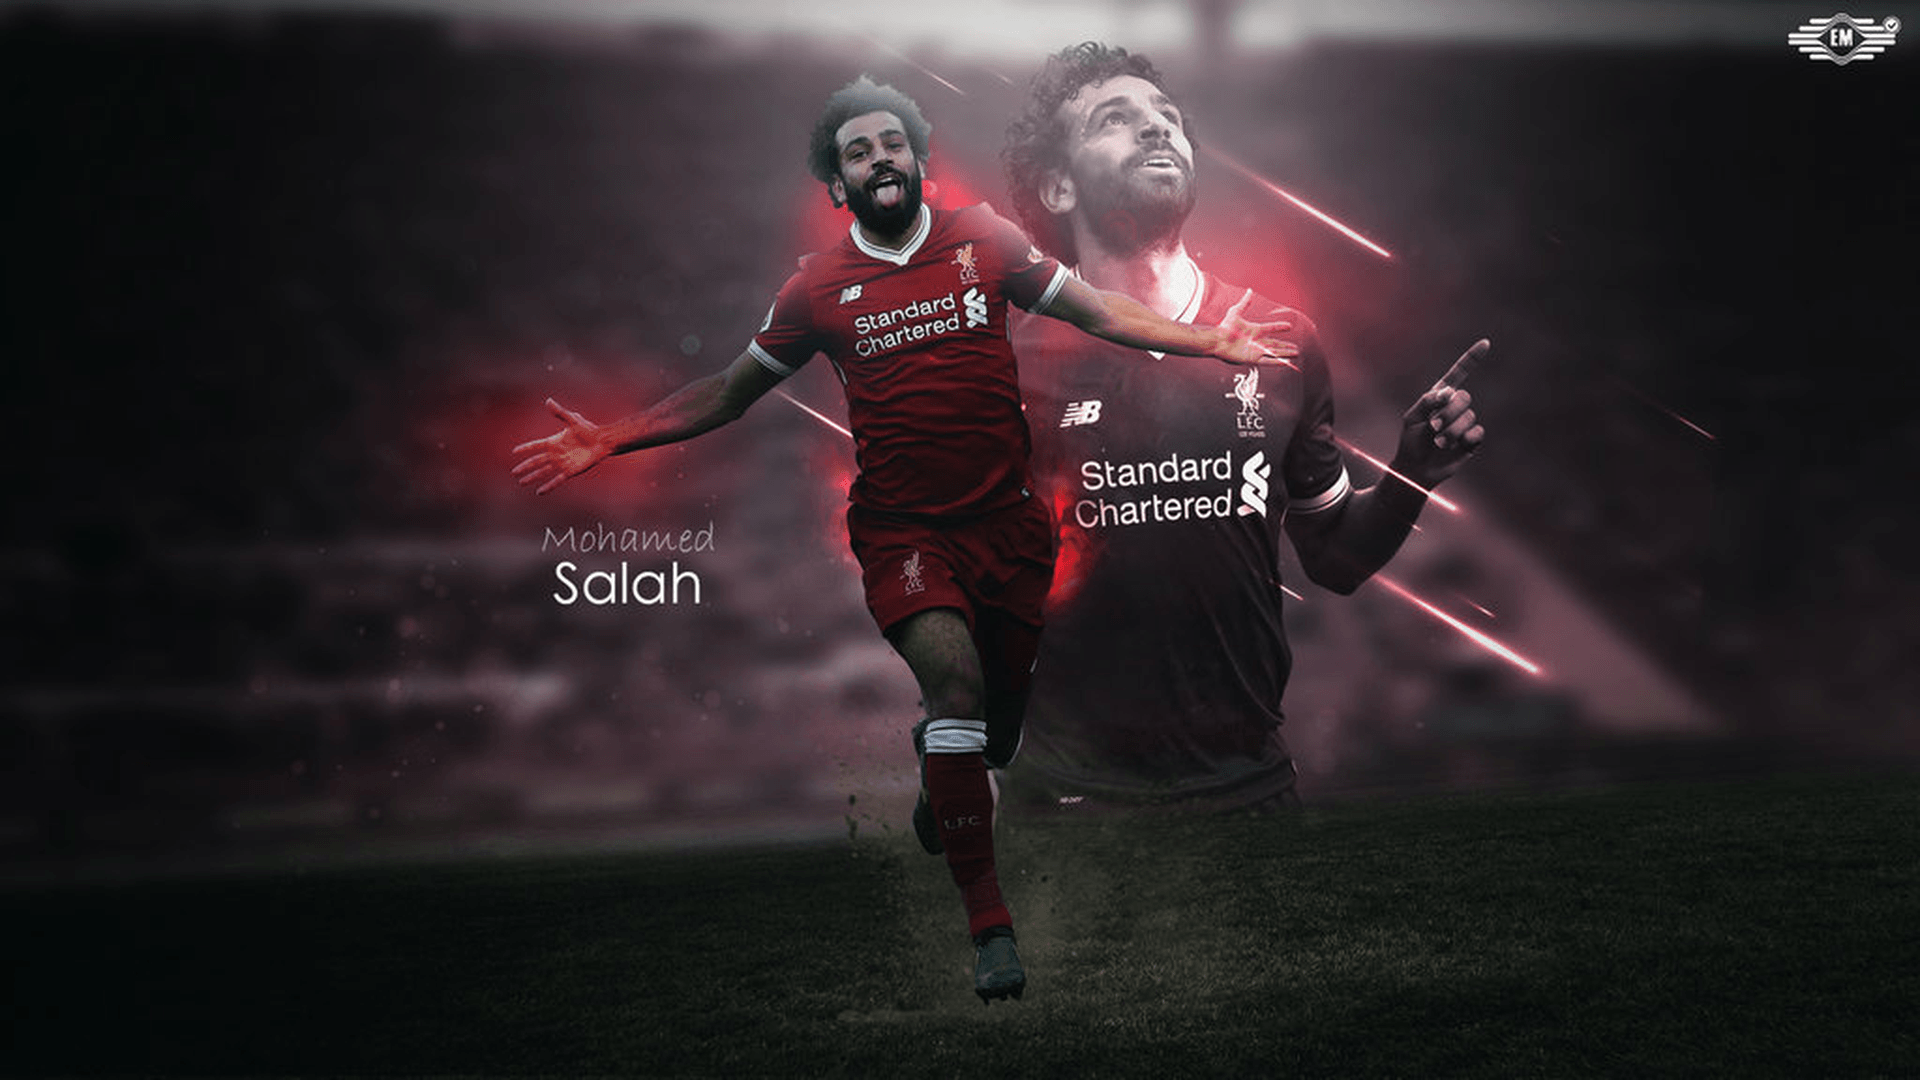 Download Mohamed Salah Liverpool Football player for 1080p